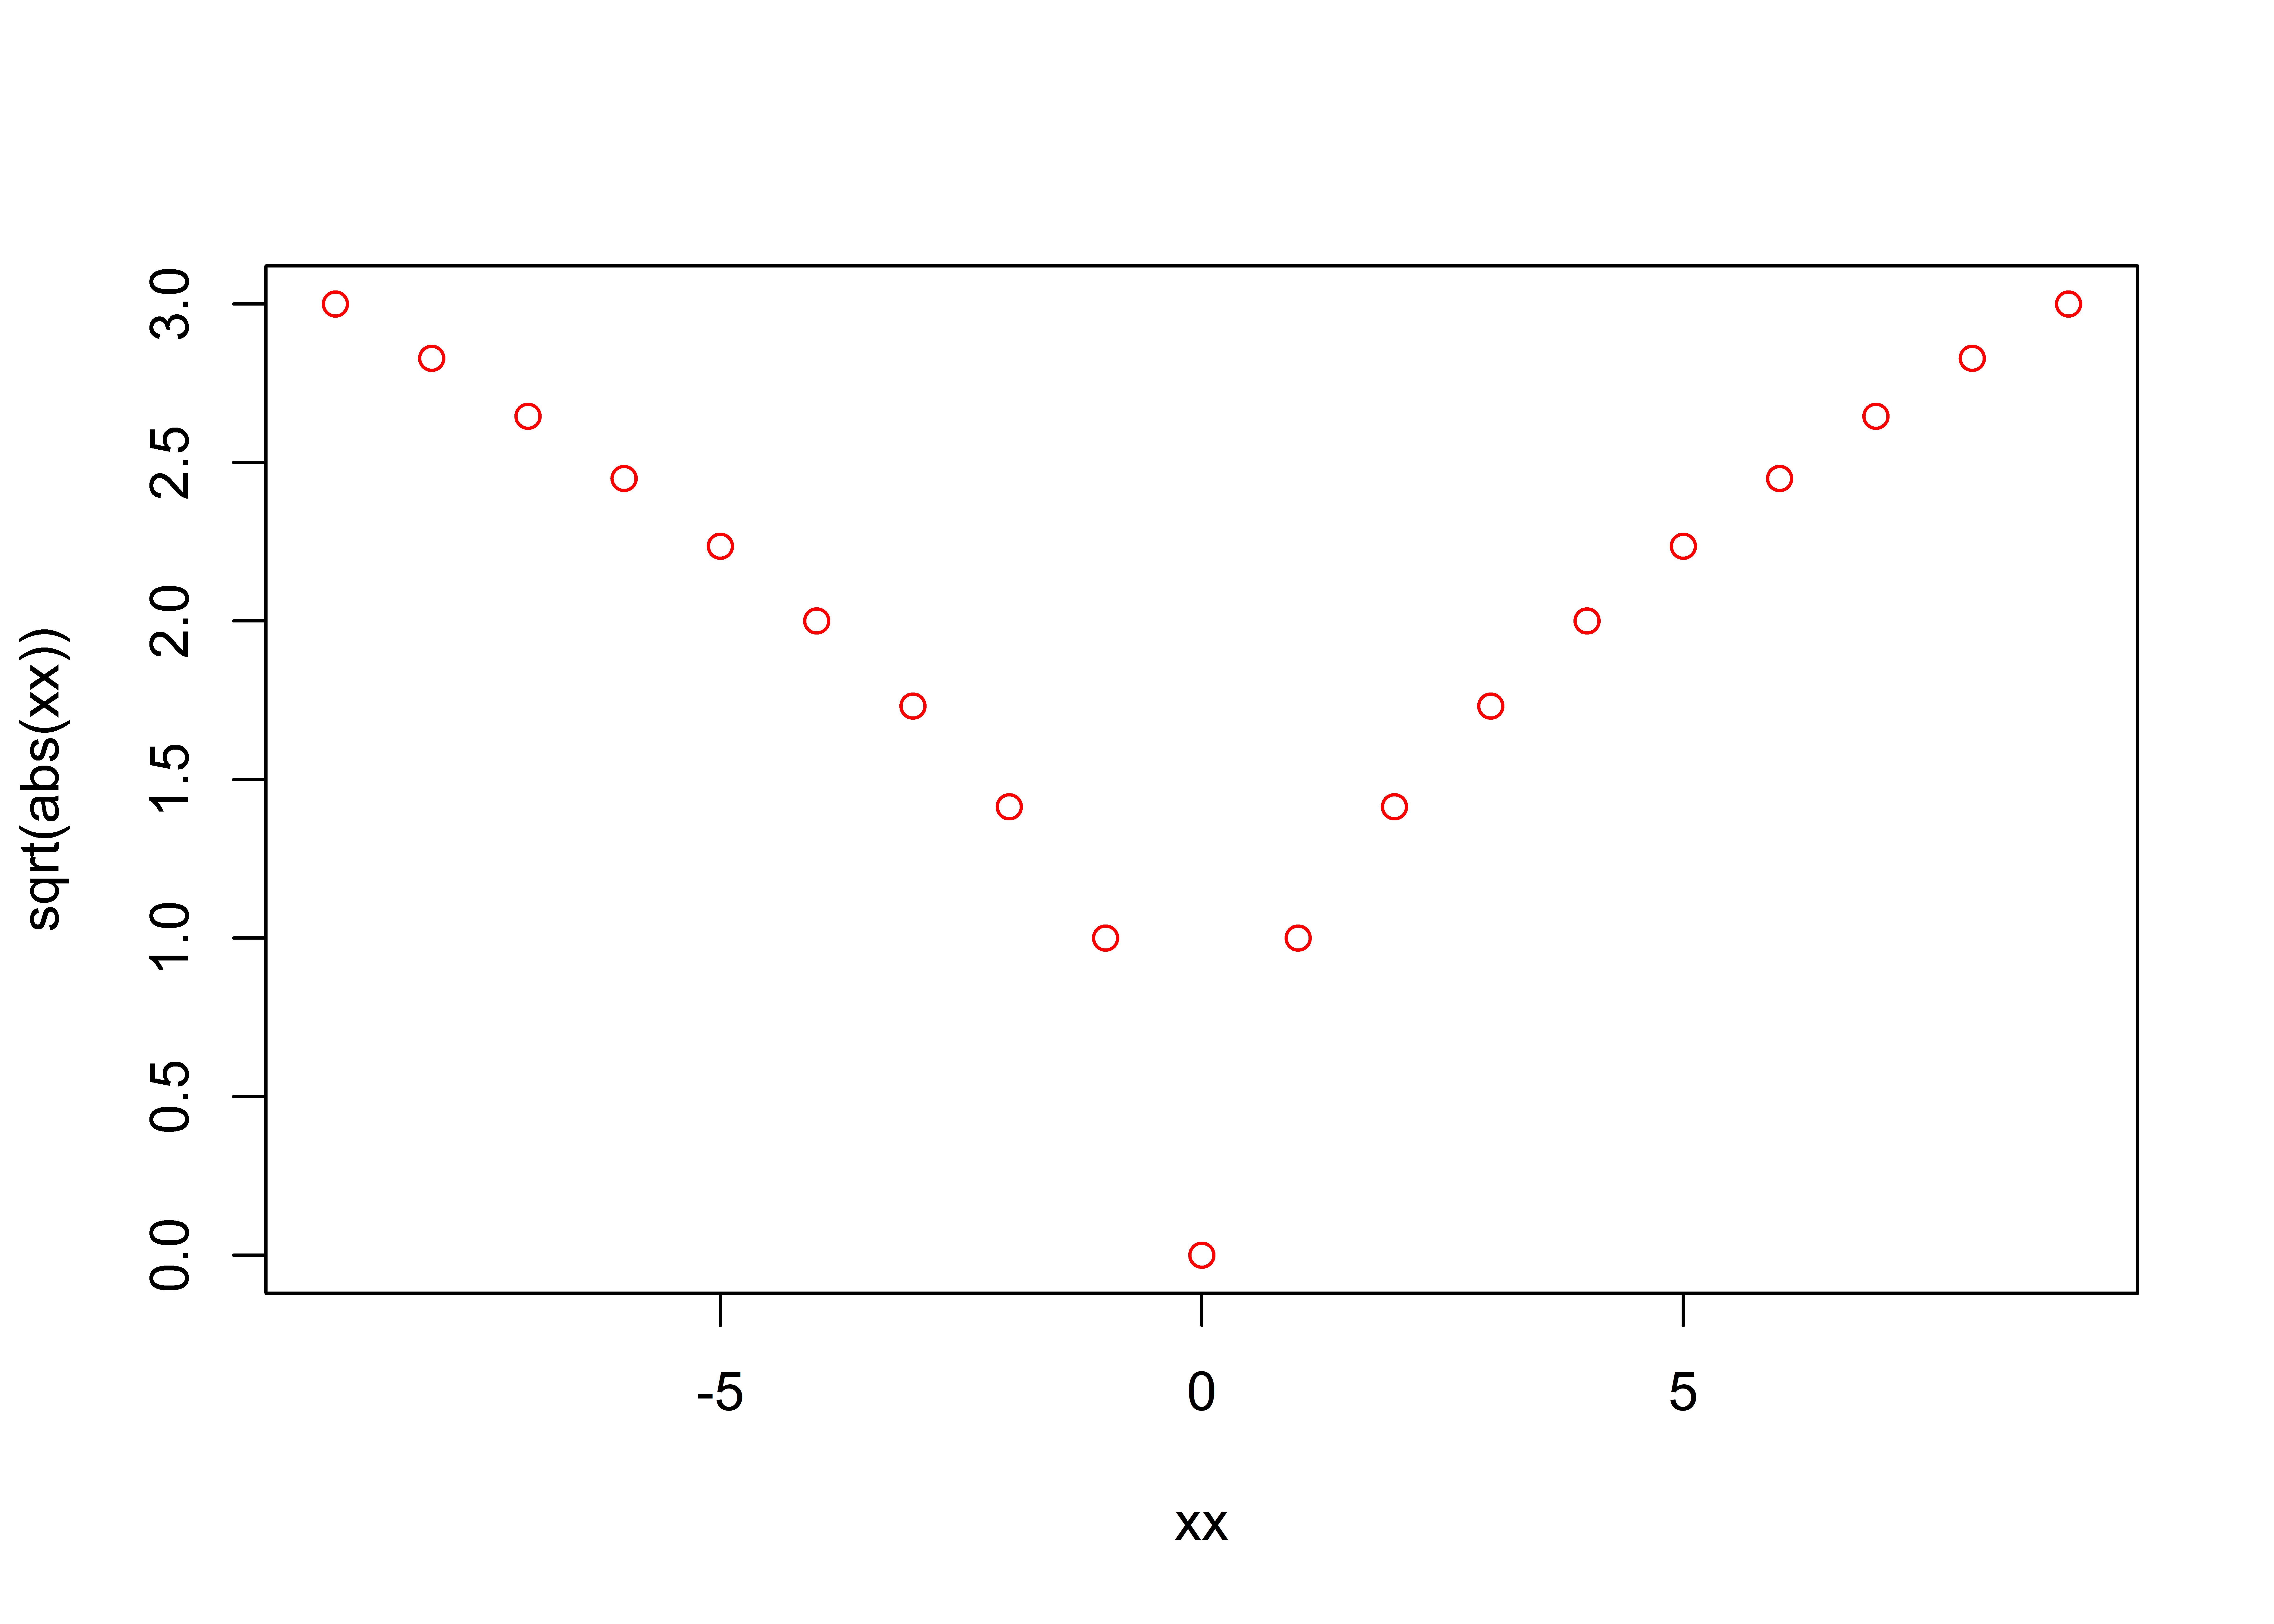 Plot generated from code in R's helpfile.